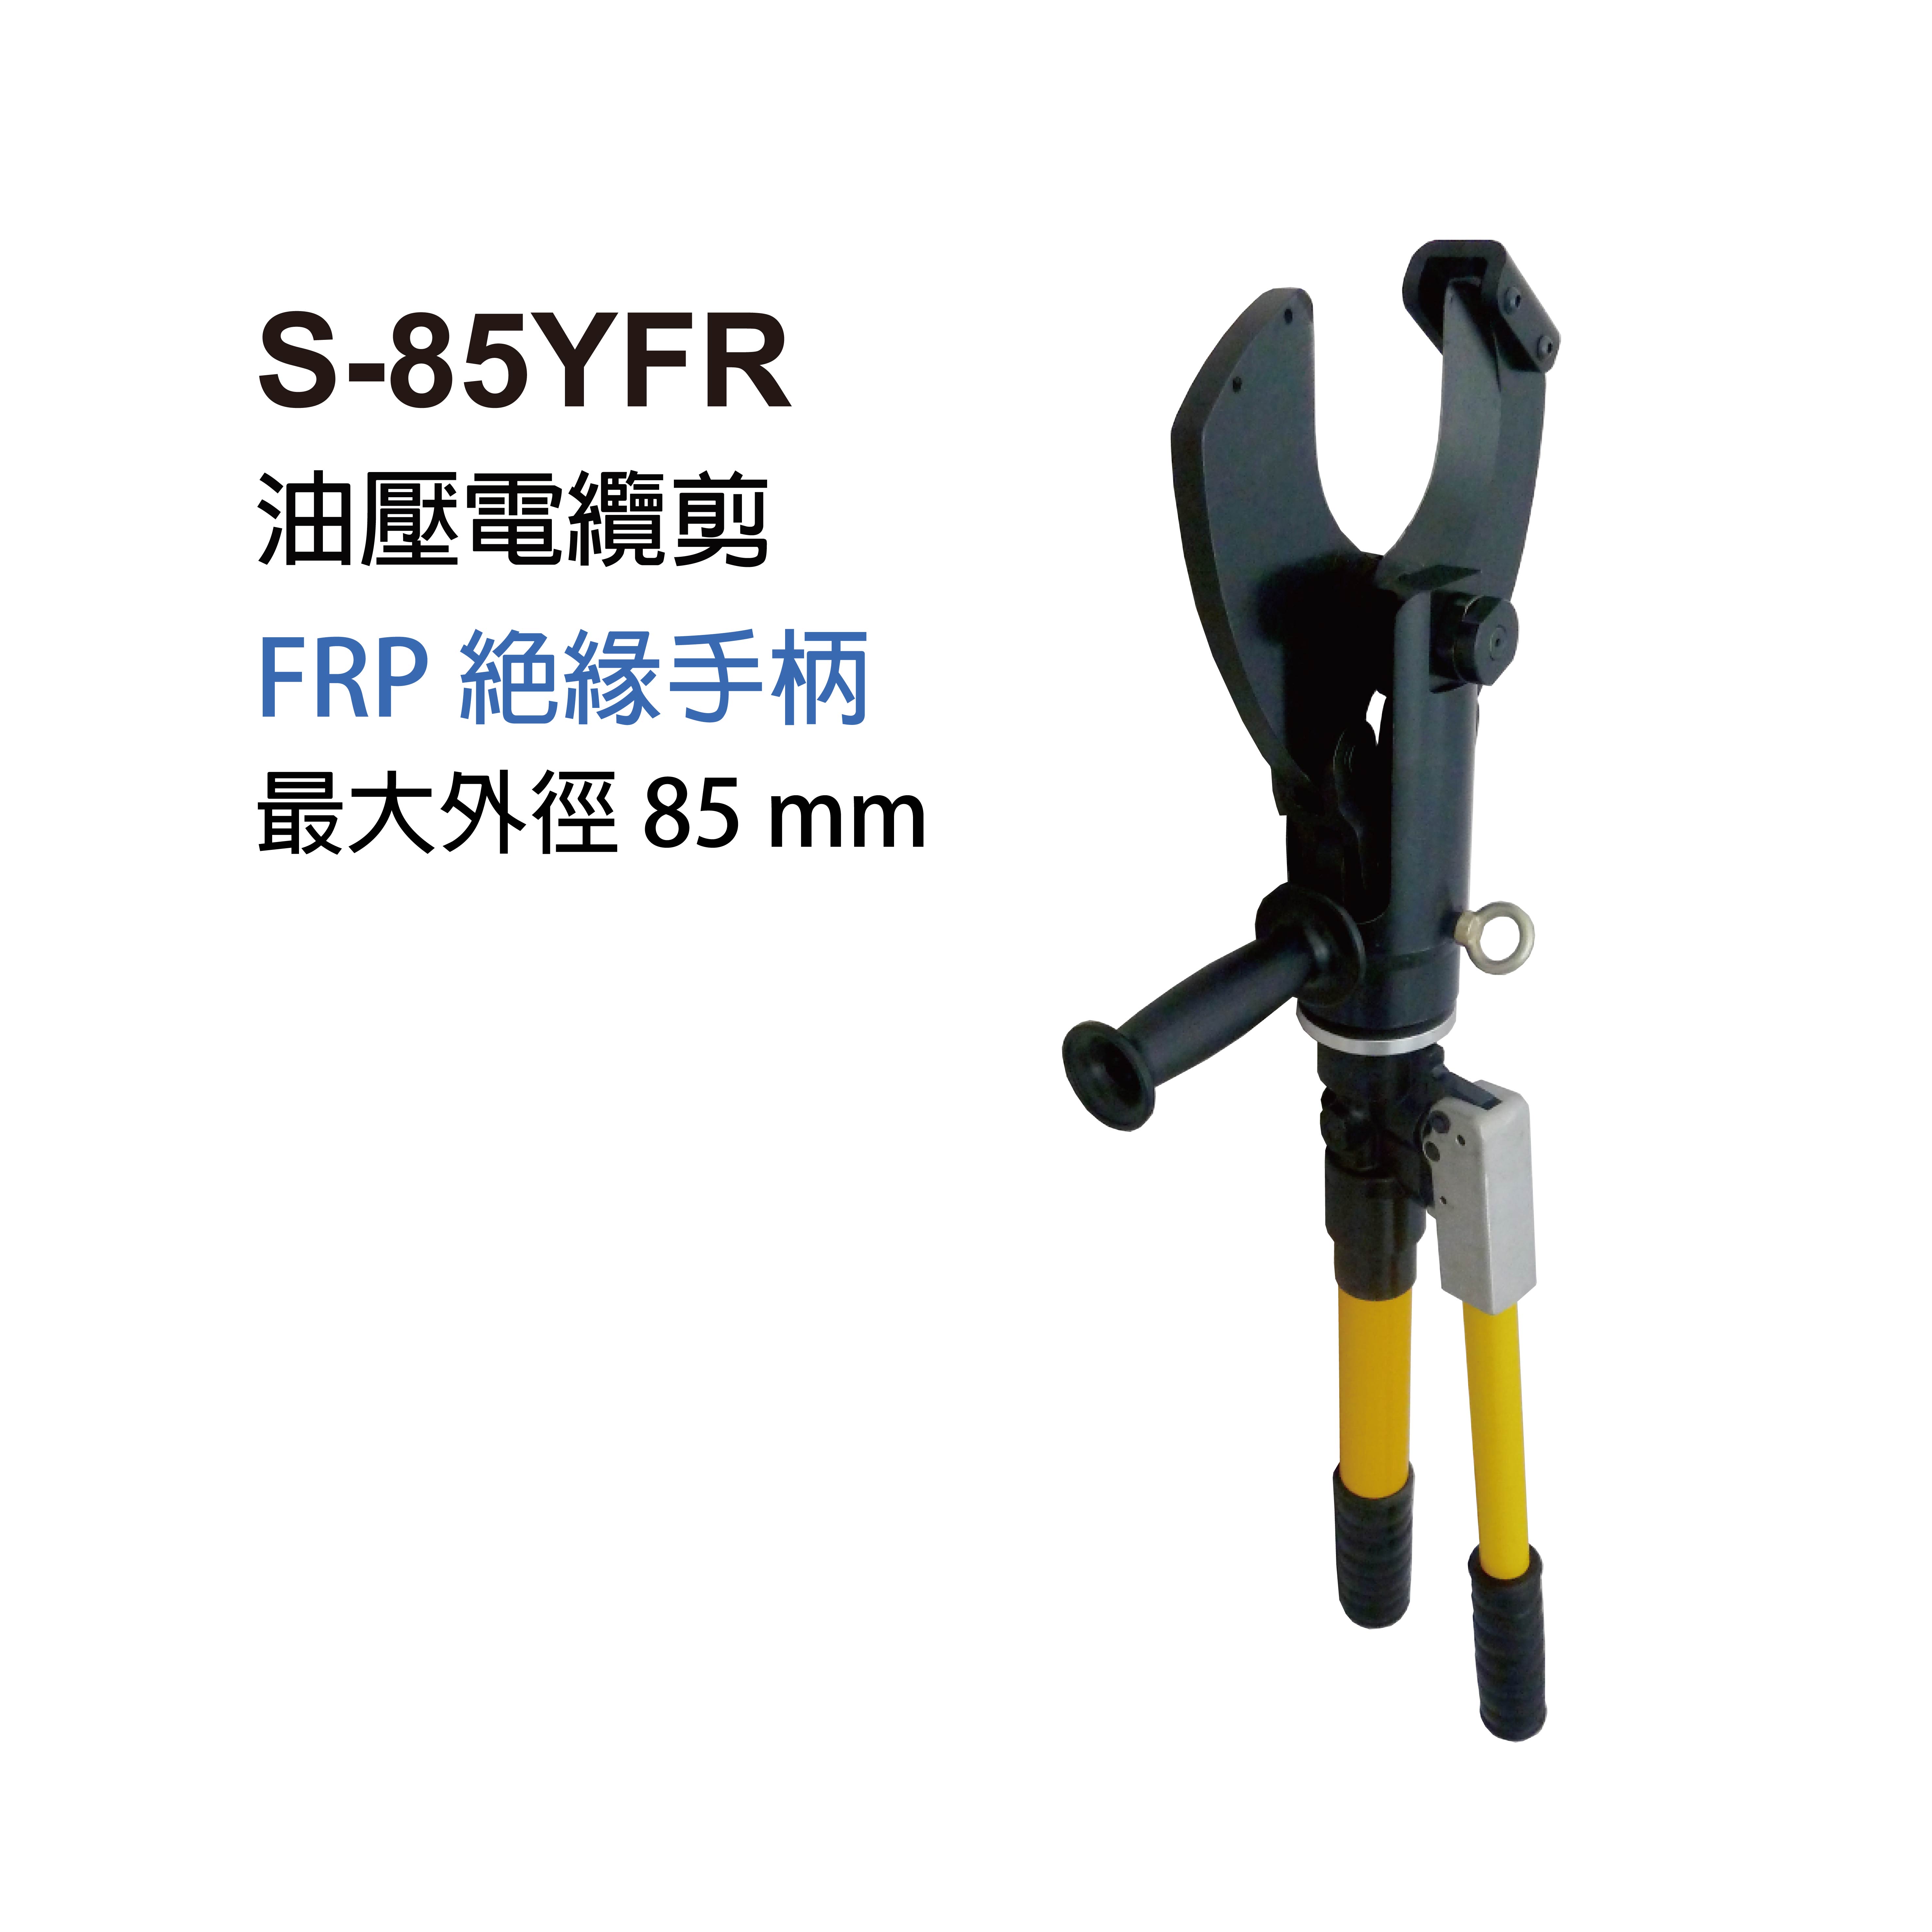 S-85YFR MANUAL HYDRAULIC CABLE CUTTERS